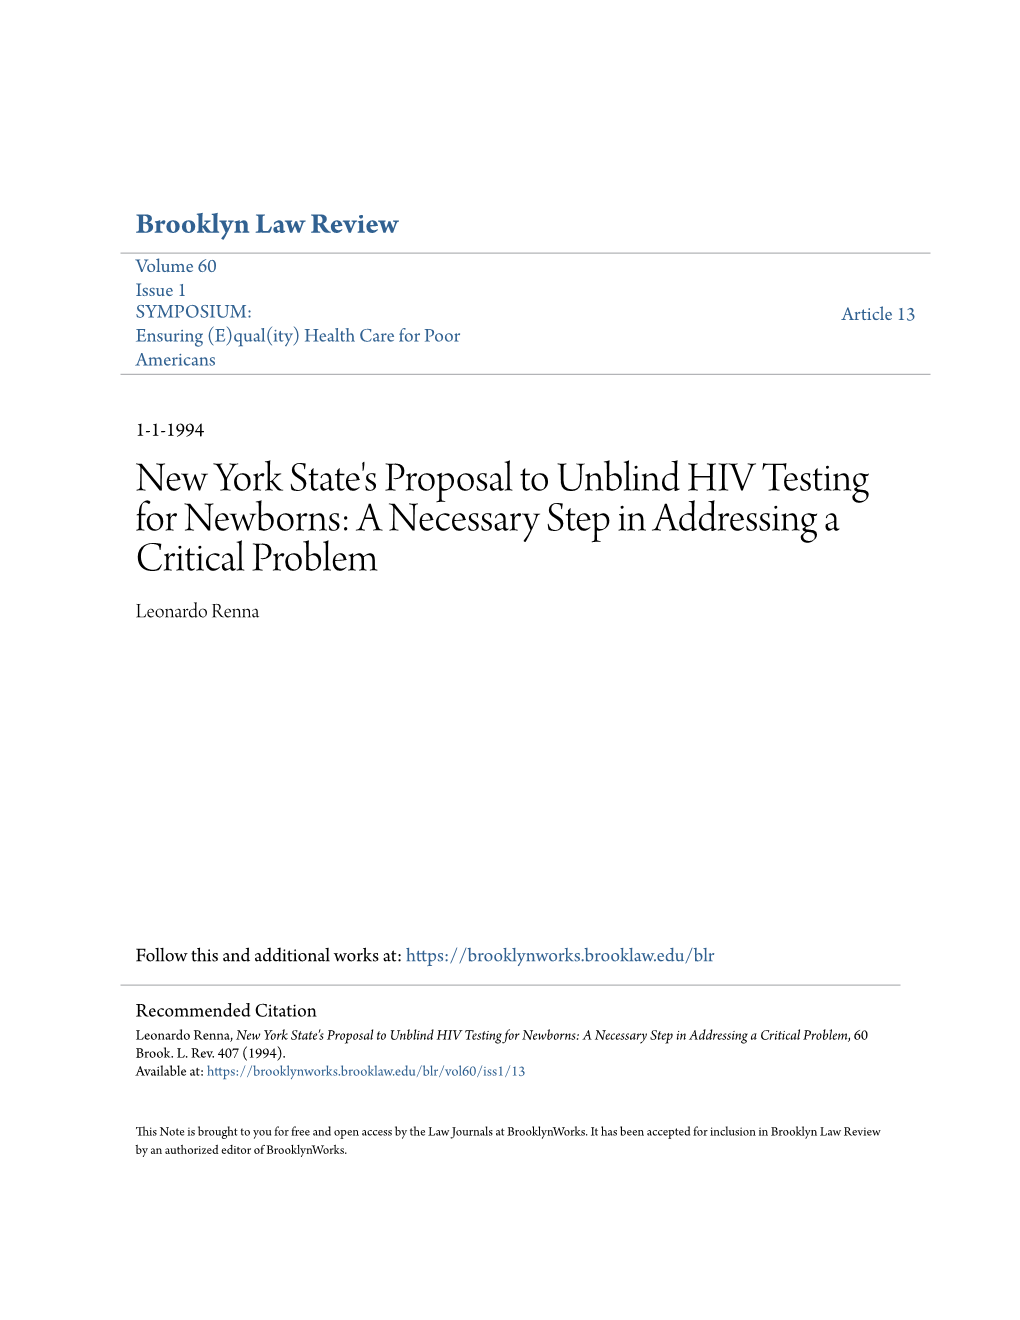 New York State's Proposal to Unblind HIV Testing for Newborns: a Necessary Step in Addressing a Critical Problem Leonardo Renna